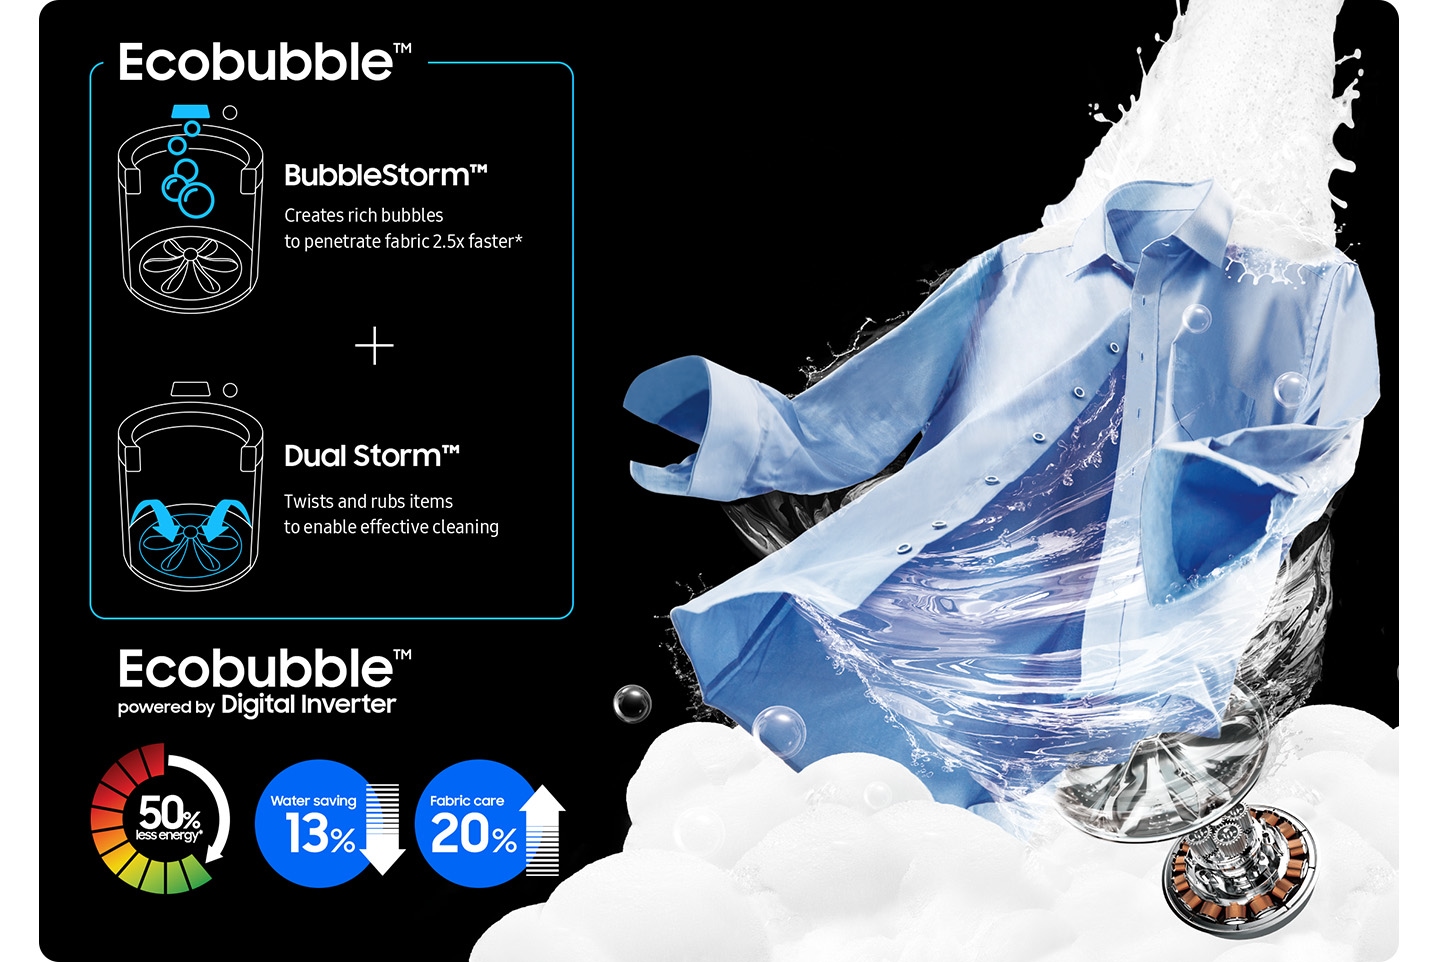 A strong stream of water, foam, and a Digital Inverter Technology motor are washing a blue shirt. Bubblestorm™ creates rich bubbles to penetrate fabric 2.5x faster* and Dual Storm™ twists and rubs items to enable effective cleaning. Ecobubble™ powered by Digital Inverter, saves 50% of energy, 13% of water and cares better 20% of fabric.